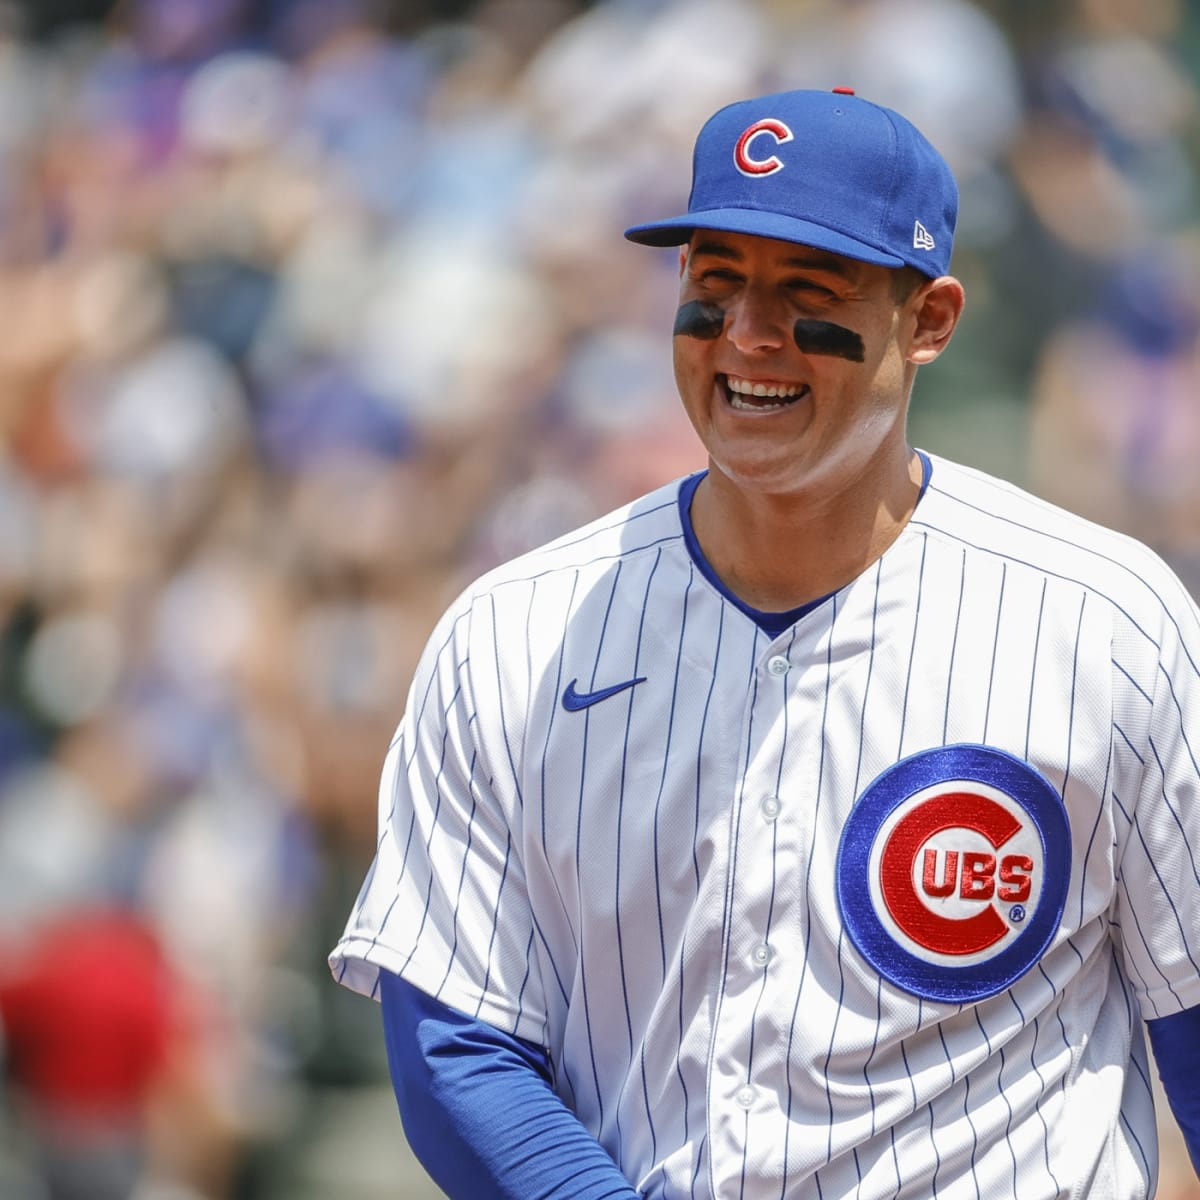 Anthony Rizzo trade: New York Yankees add another lefty bat - Sports  Illustrated NY Yankees News, Analysis and More